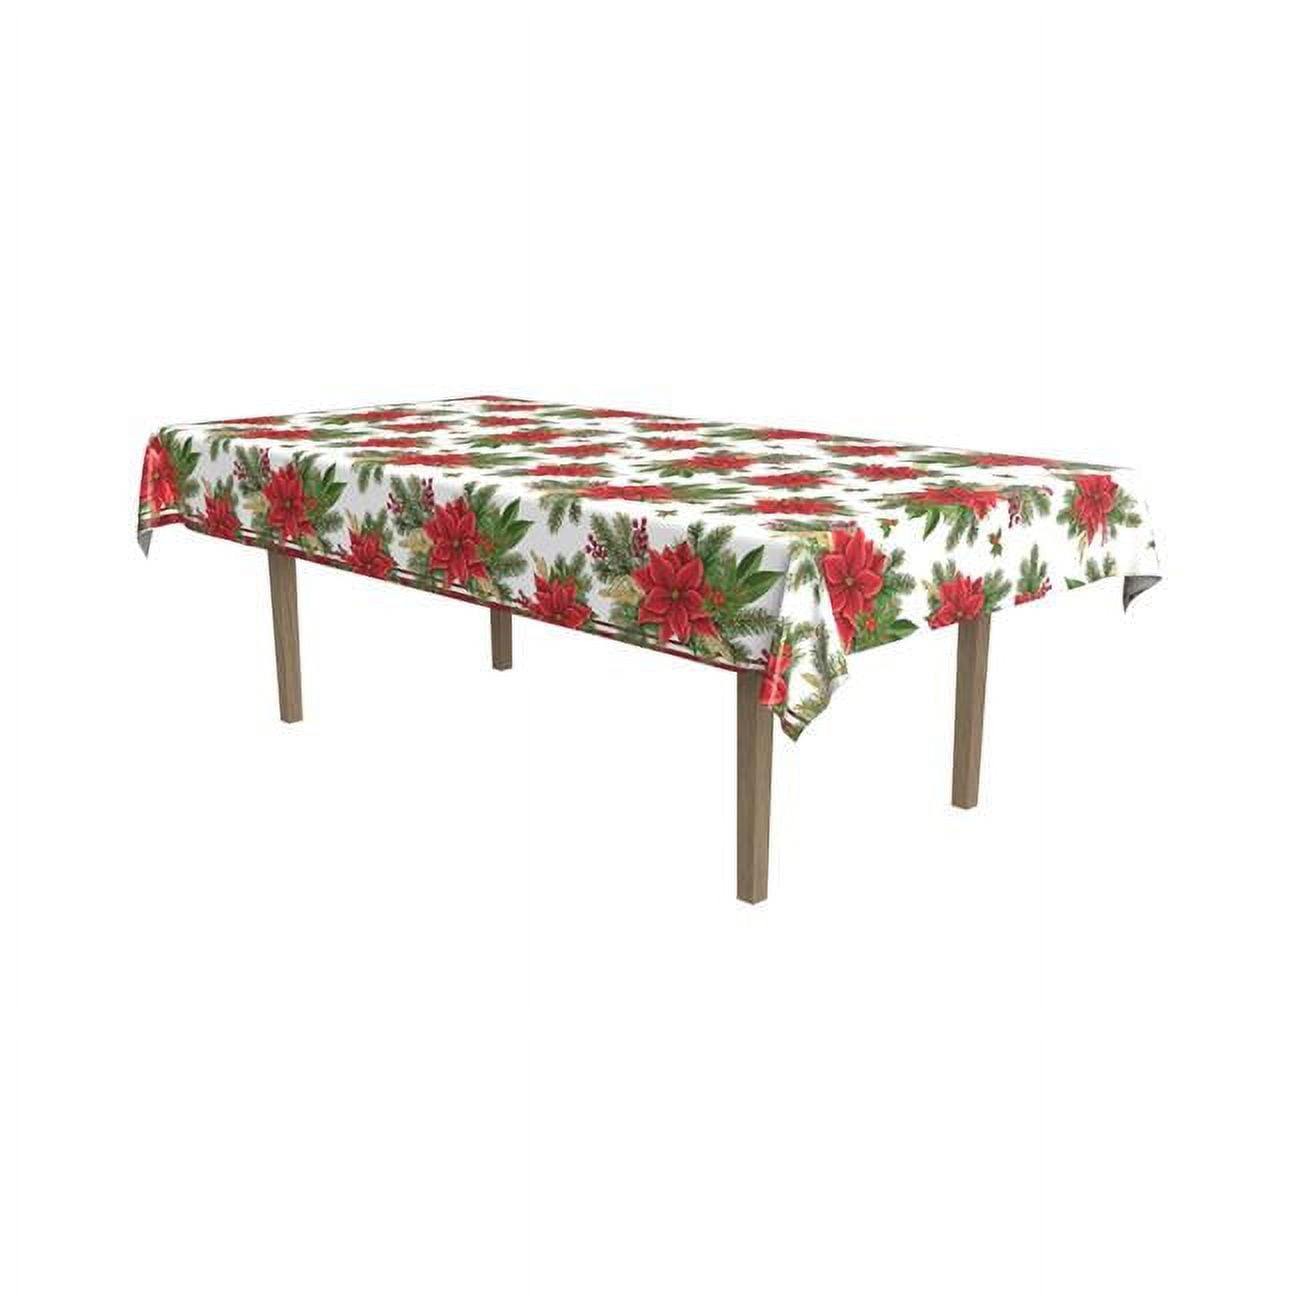 Picture of Beistle 20131 54 x 108 in. Poinsettia Tablecover, Pack of 12